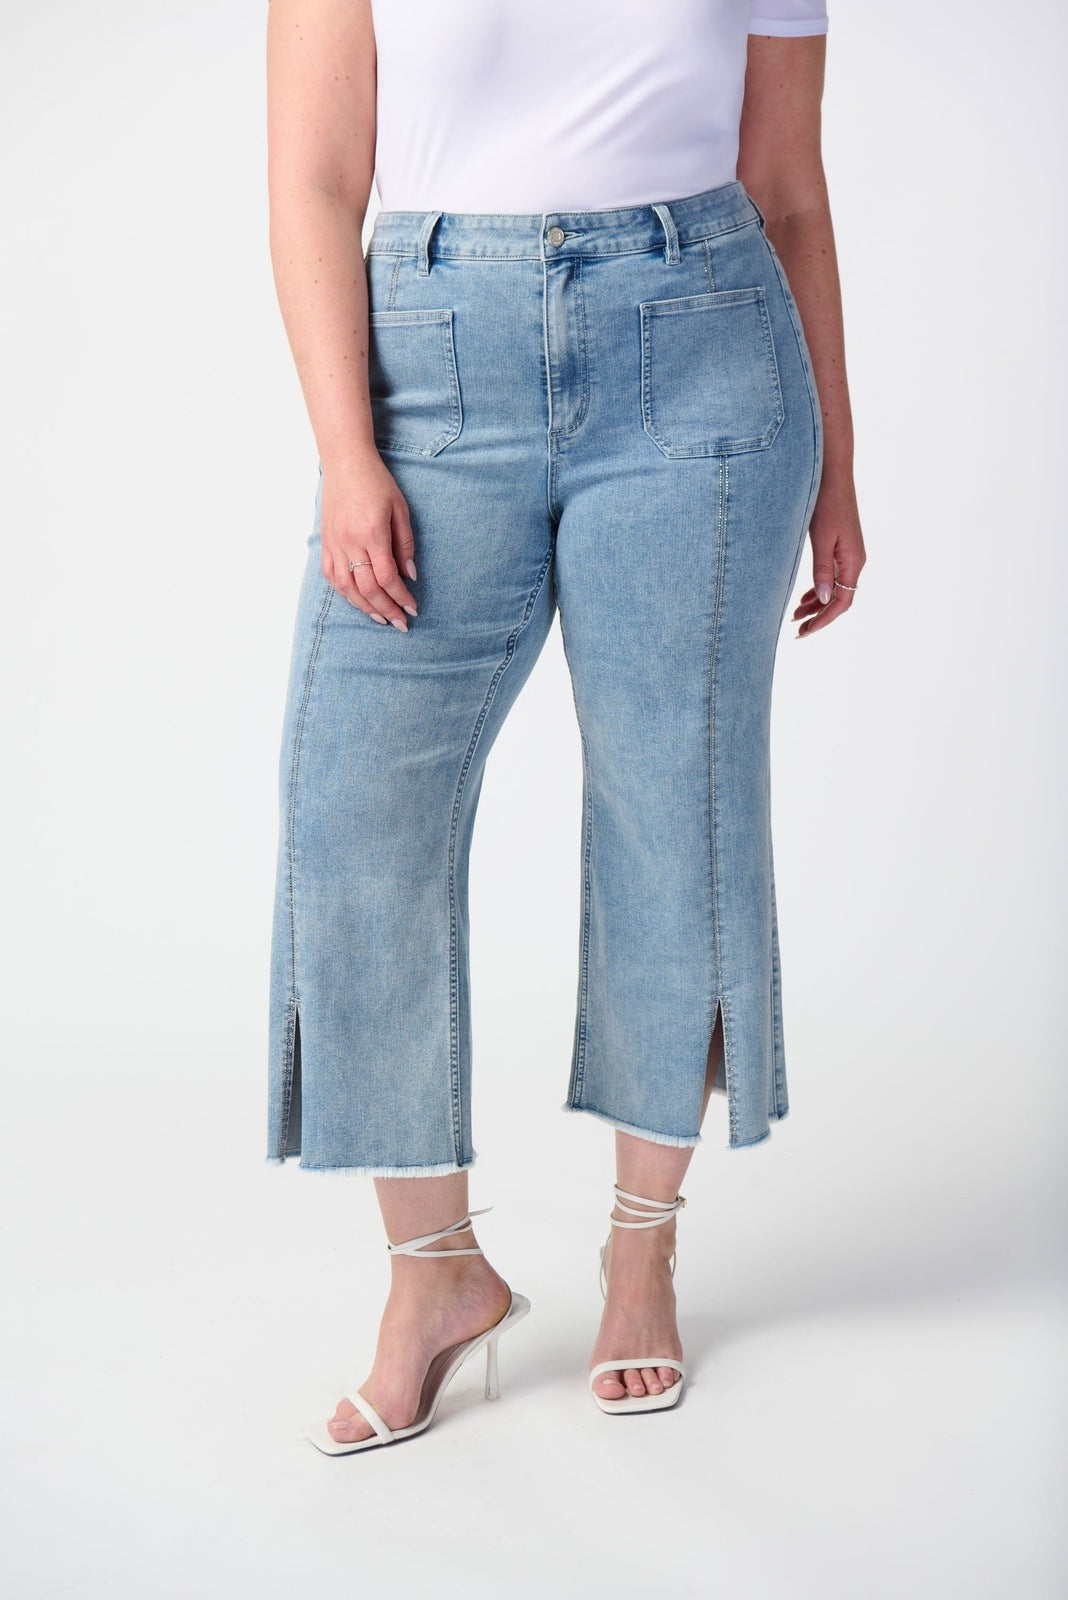 Joseph Ribkoff - Women - Culotte Jeans With Embellished Front Seam